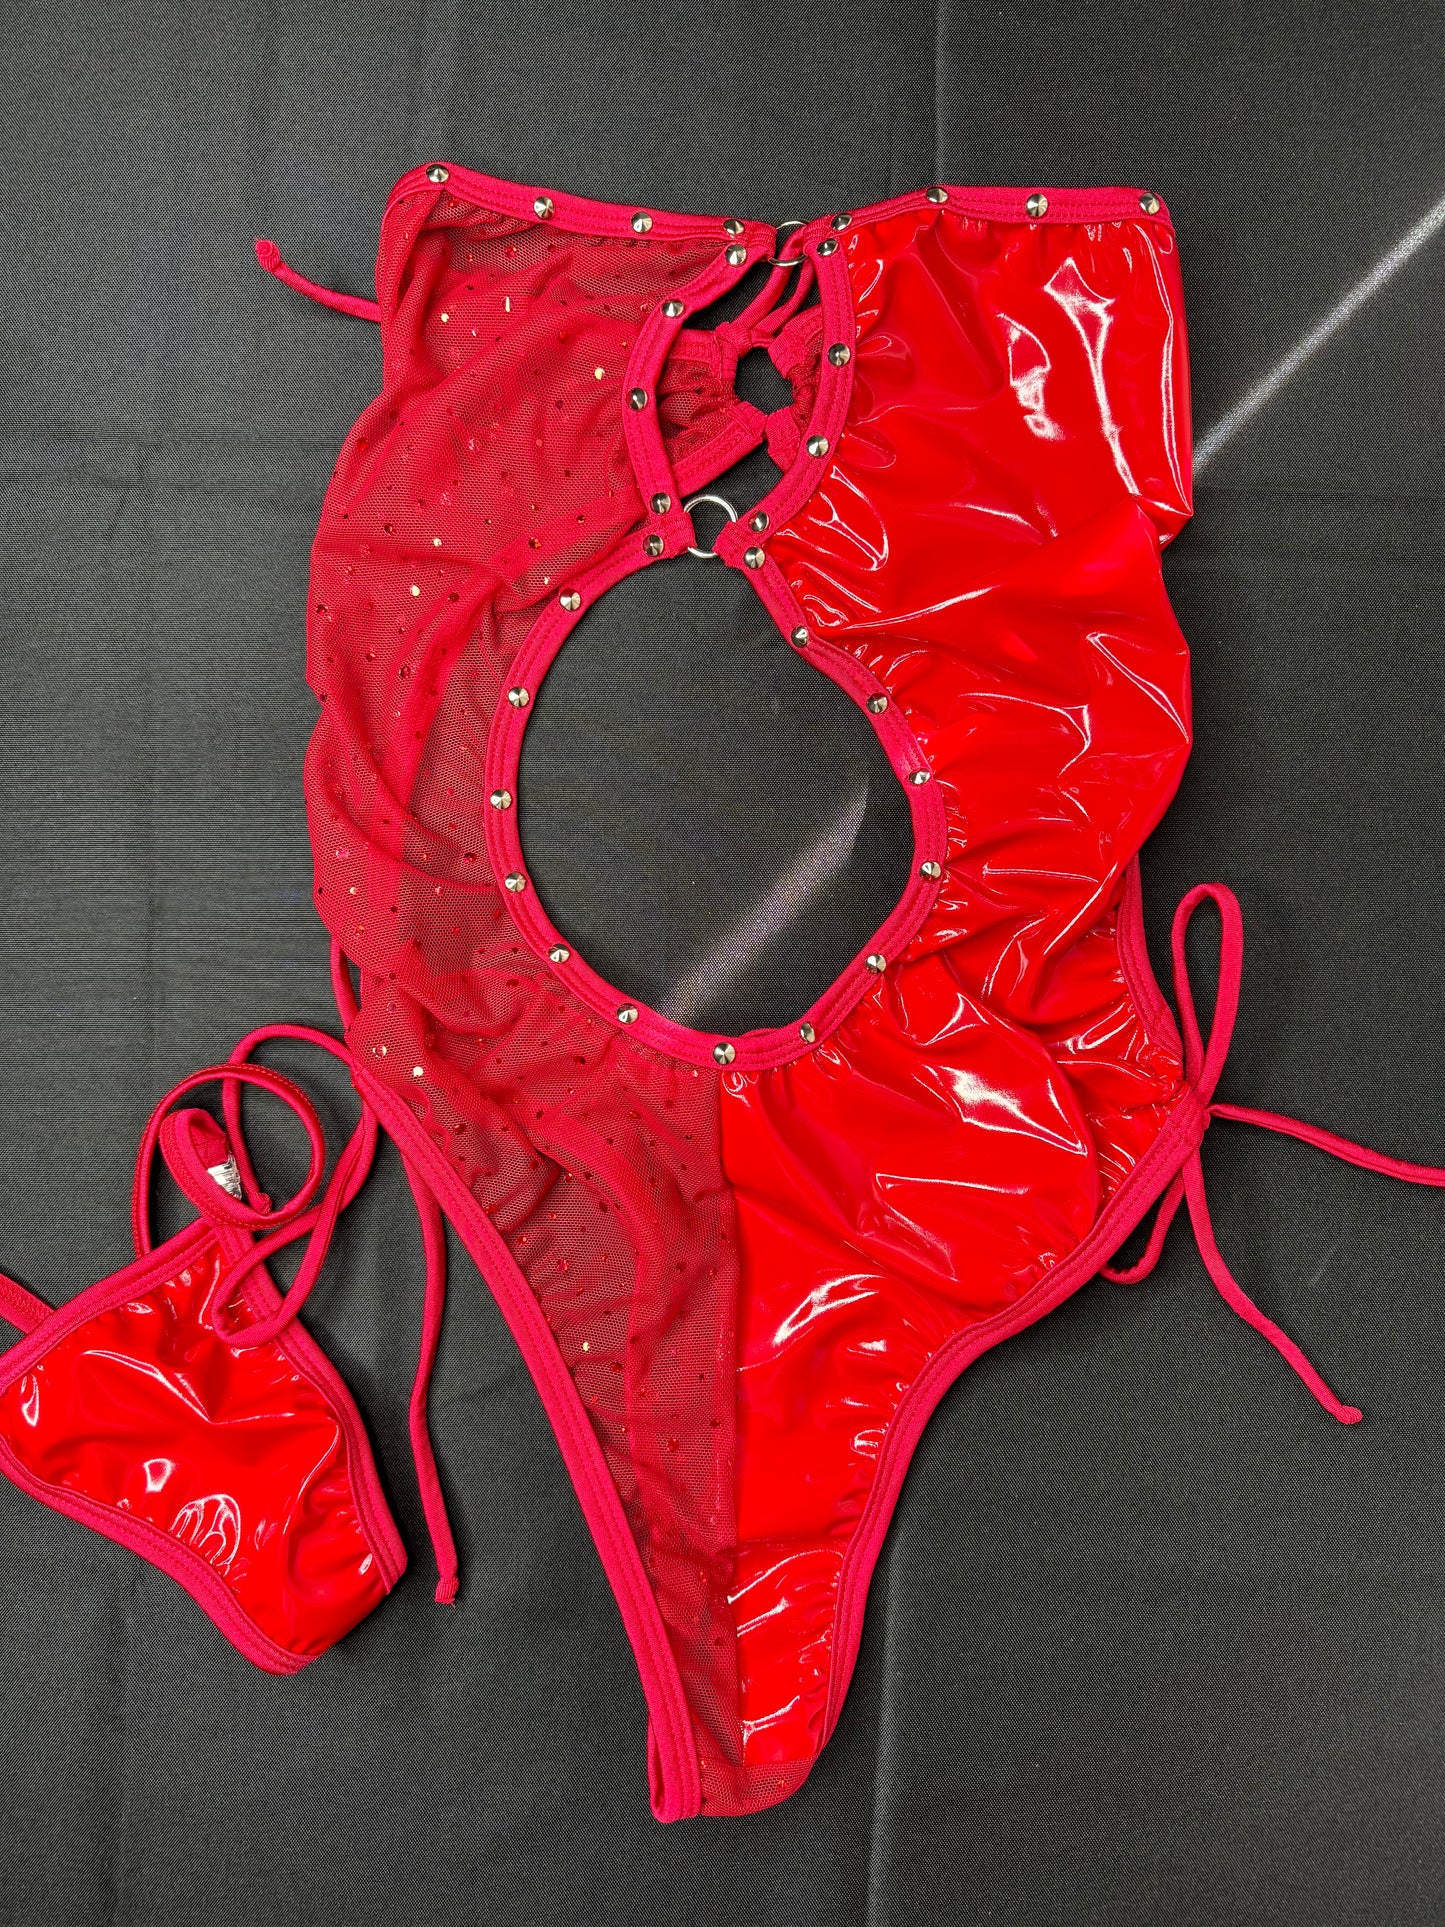 Red Latex/Mesh Valentine’s Day One-Piece Stripper Outfit